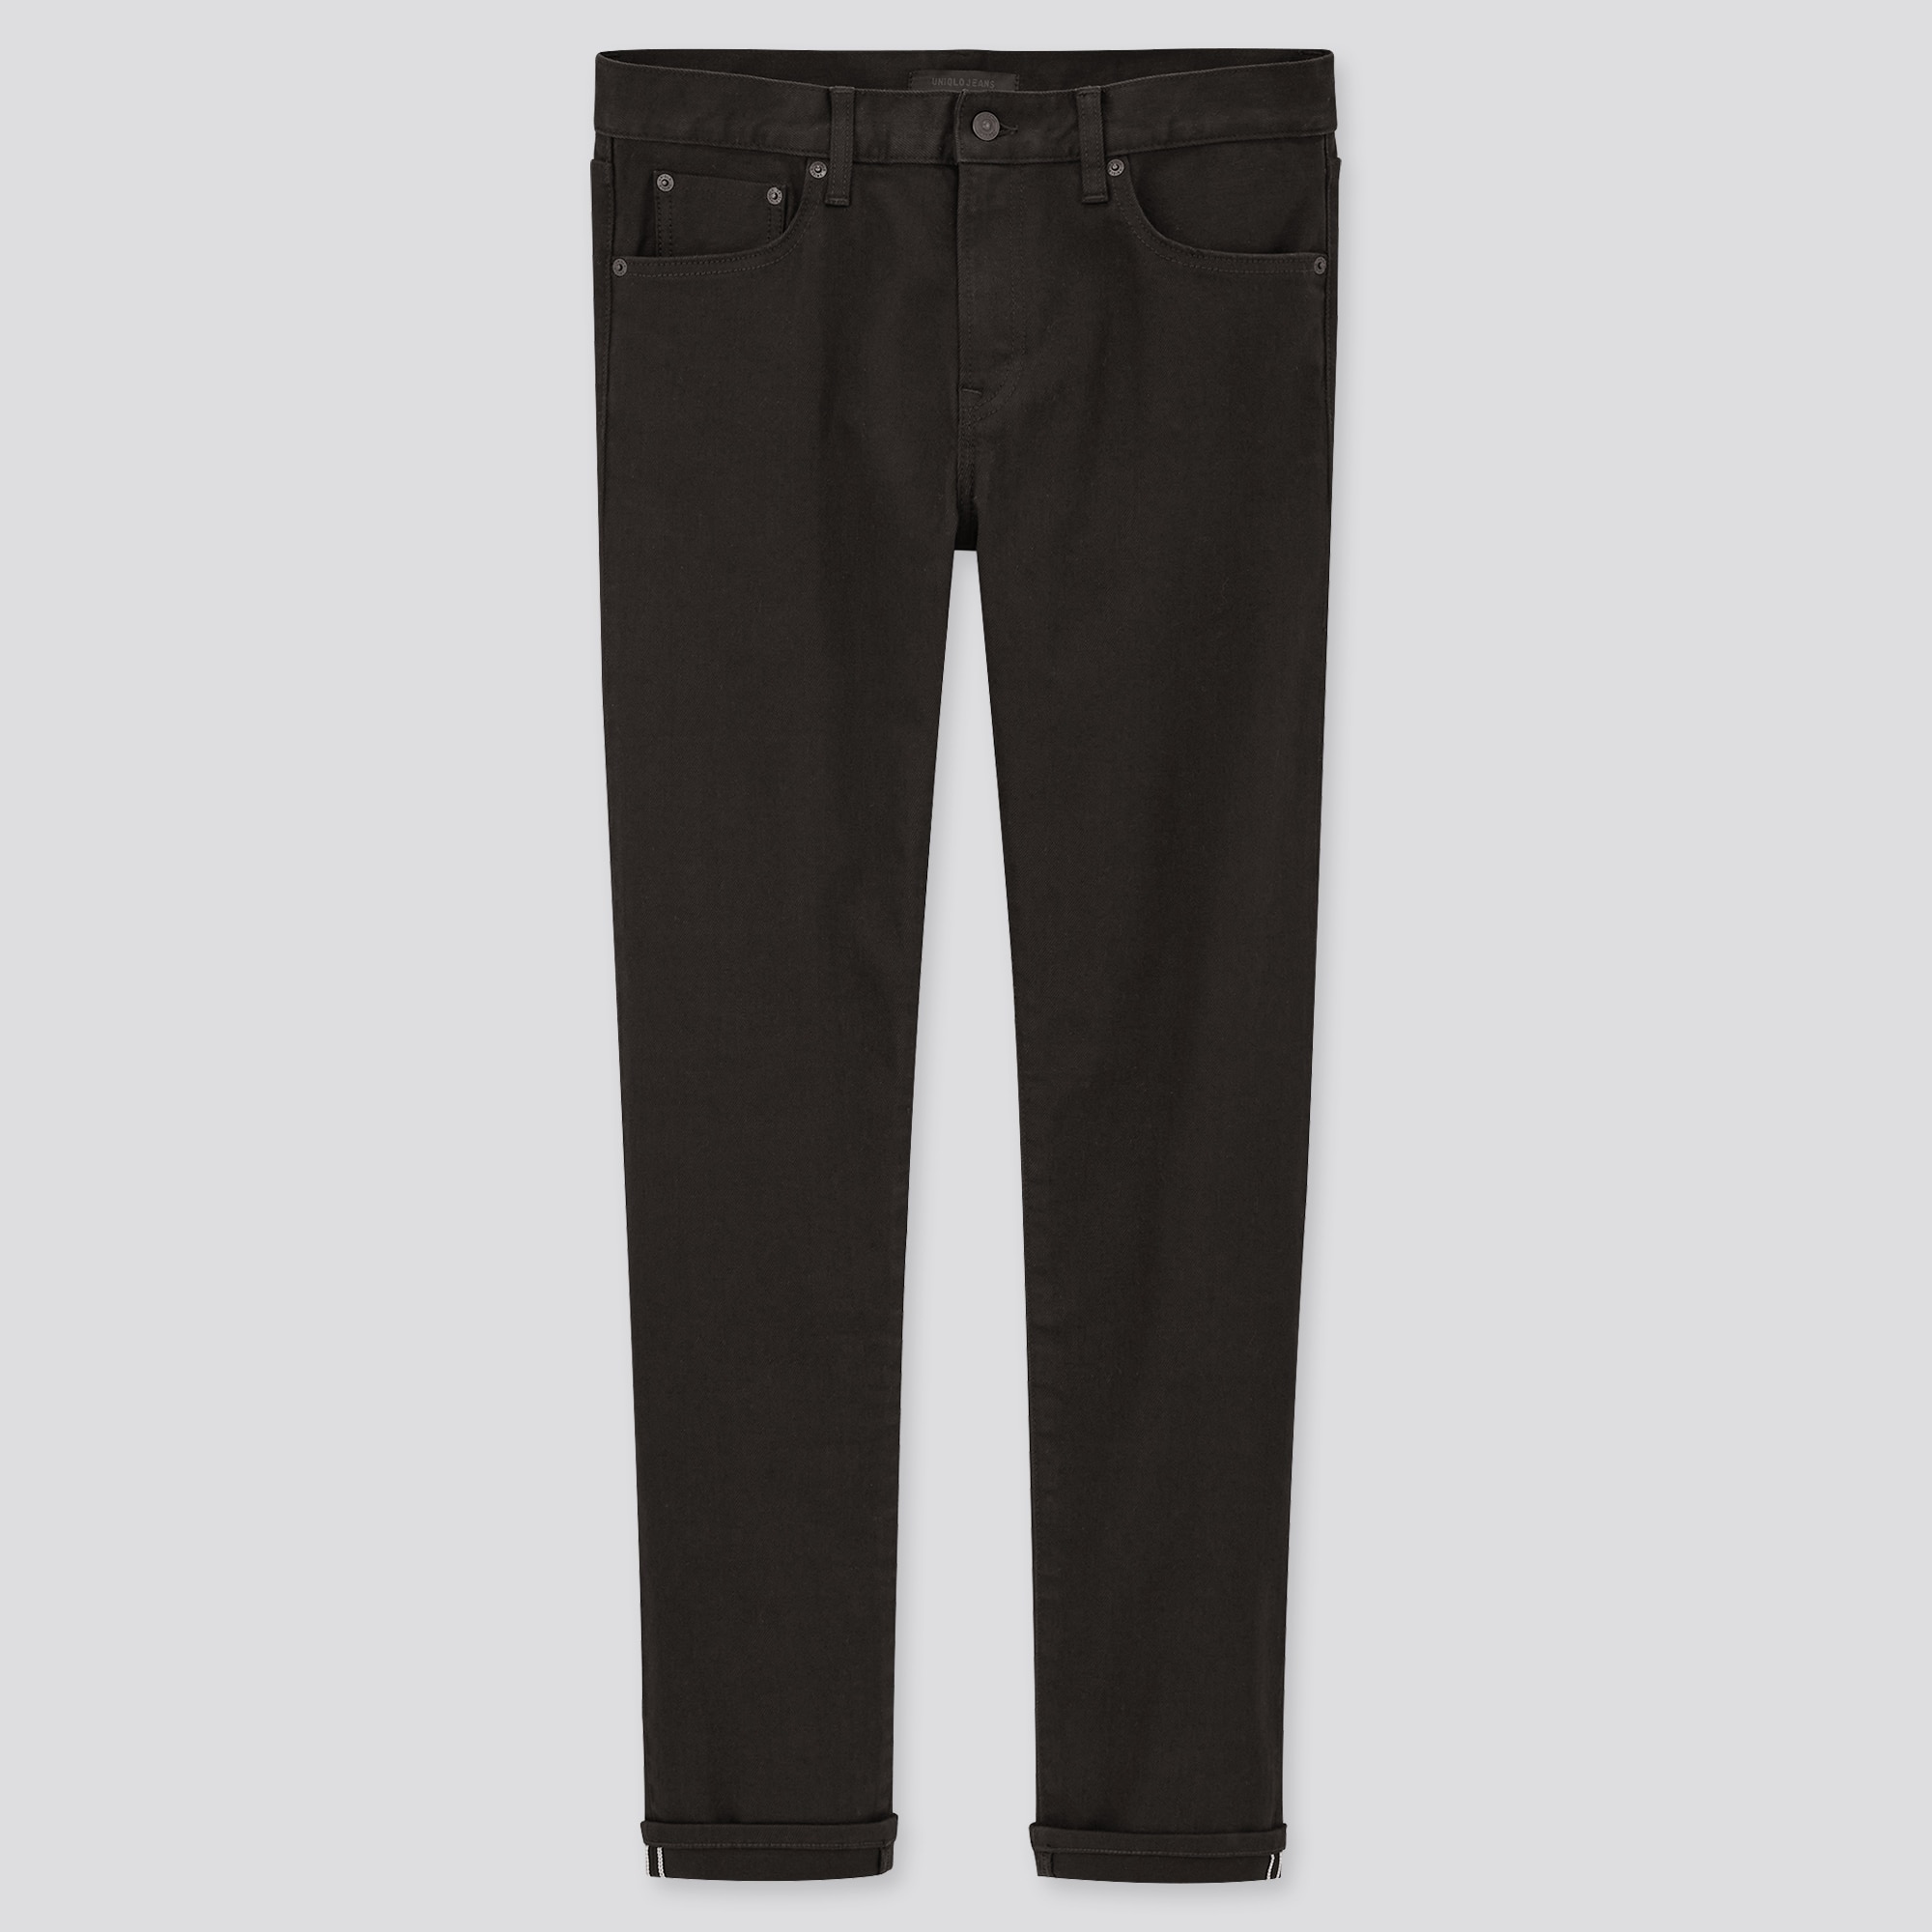 narrow fit jeans online